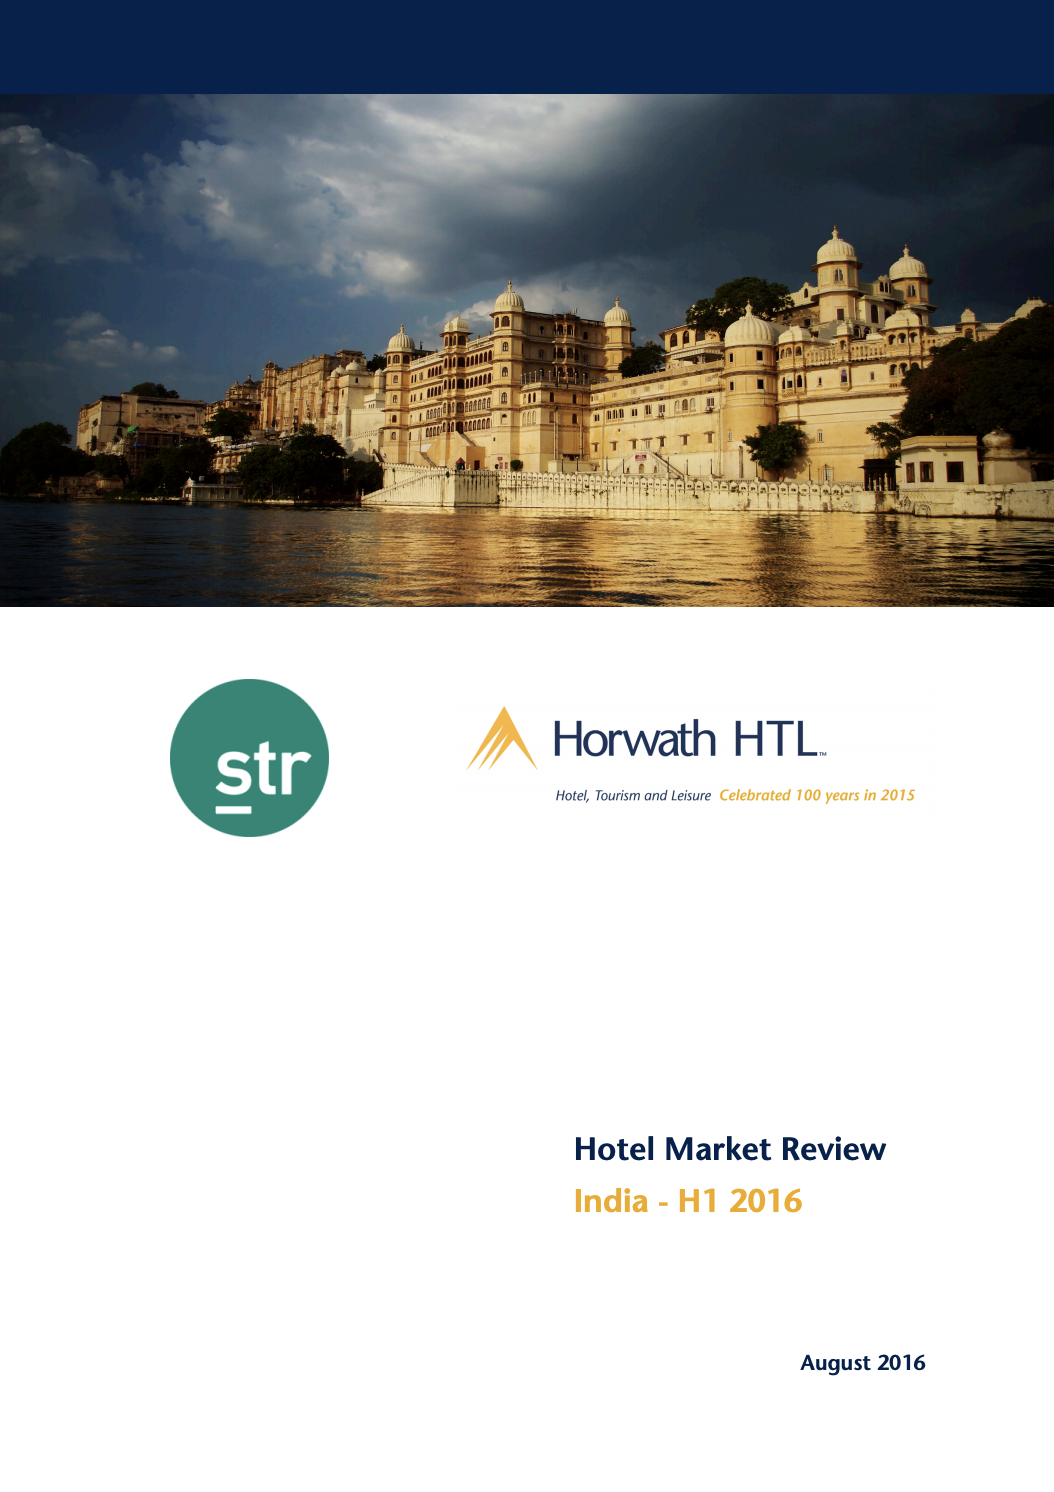 Hotel Market Review: India, H1 2016